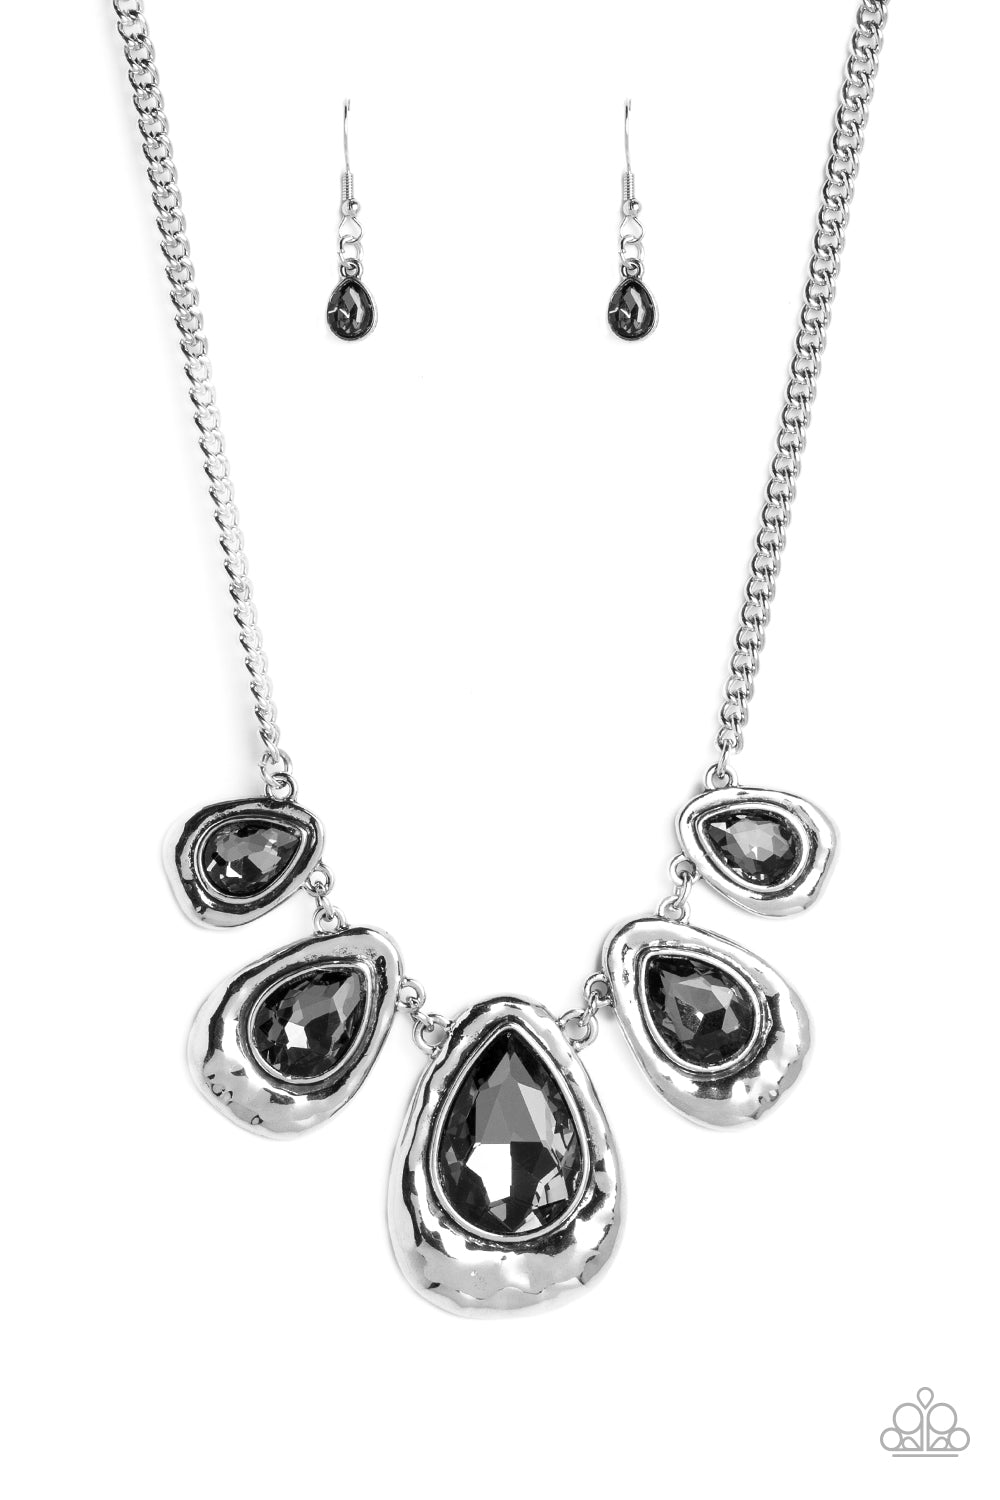 Formally Forged Silver Necklace & Bracelet Set - Paparazzi Accessories